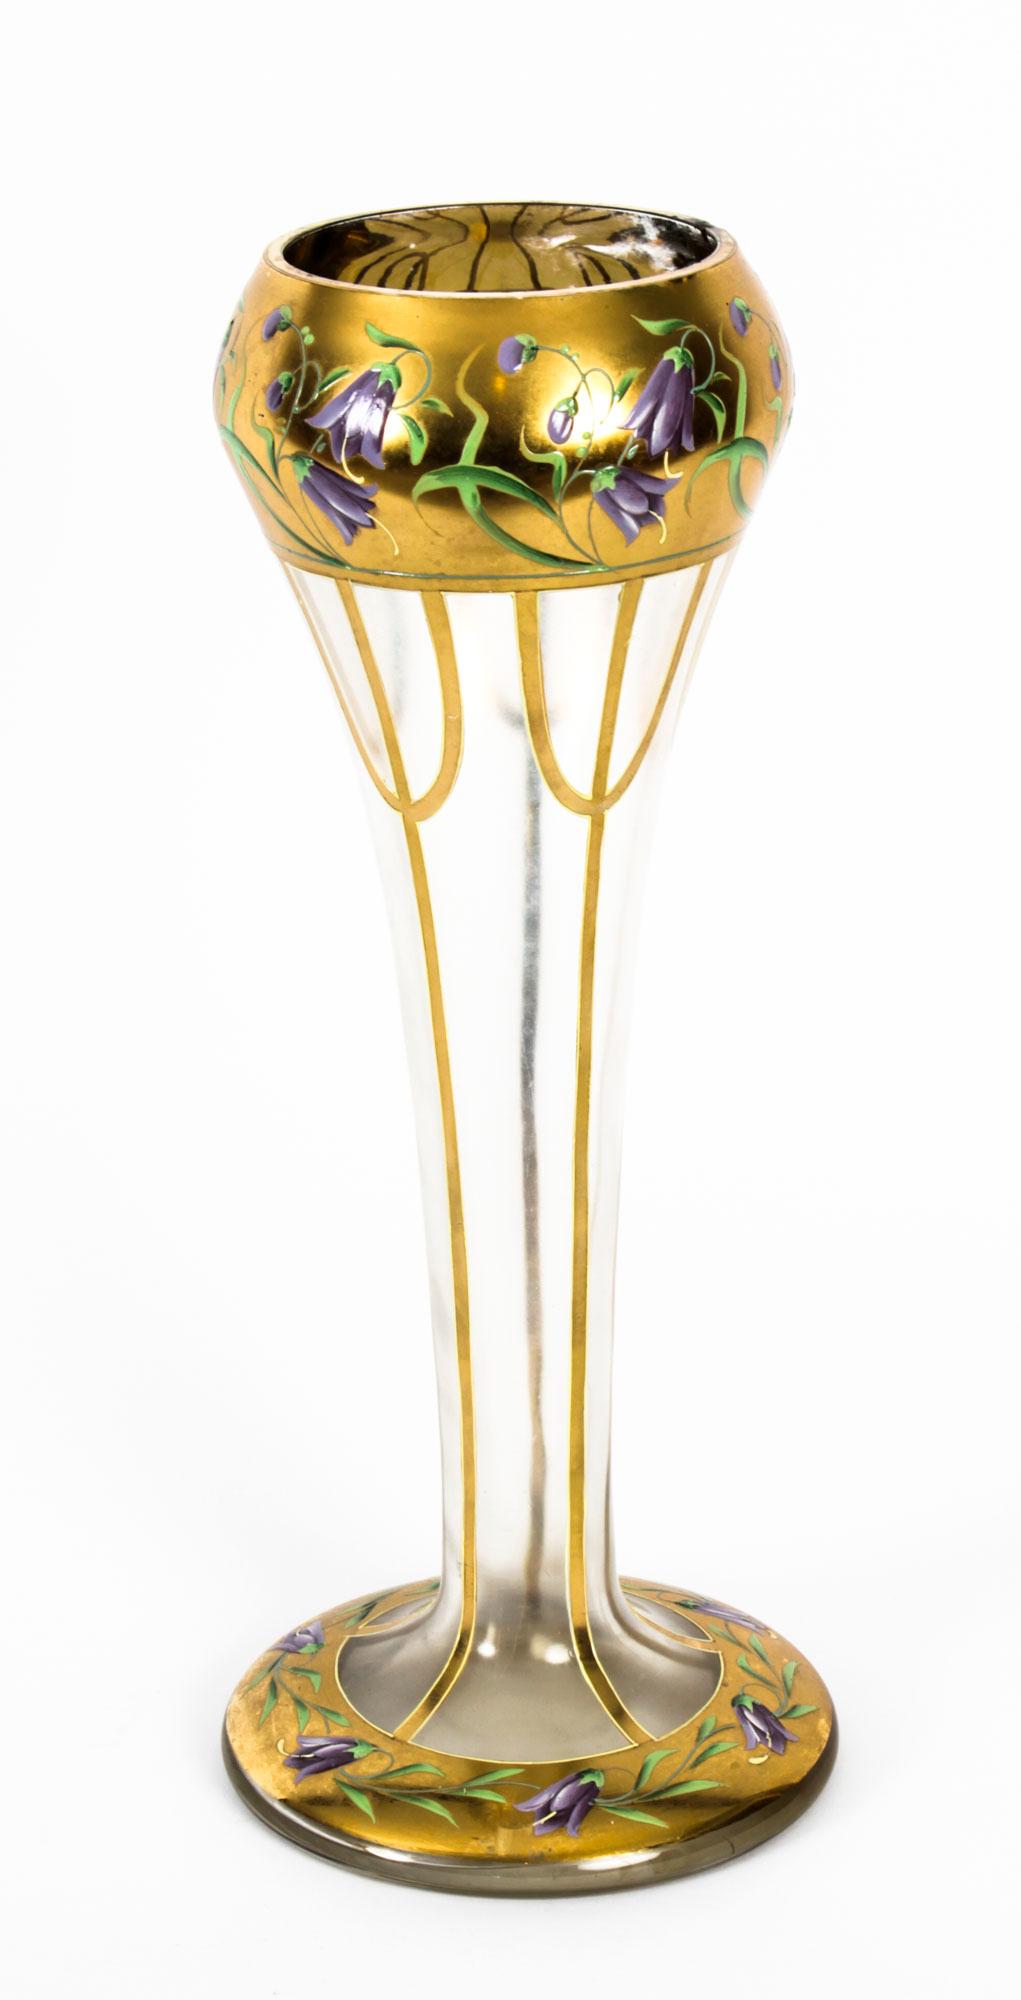 A large antique French Art Nouveau enameled glass vase, circa 1890 in date.

The tall frosted glass vase features a squat ballon base with a long slender tapering stem that opens into a large sphere decorated with gilded high-lights and enamelled